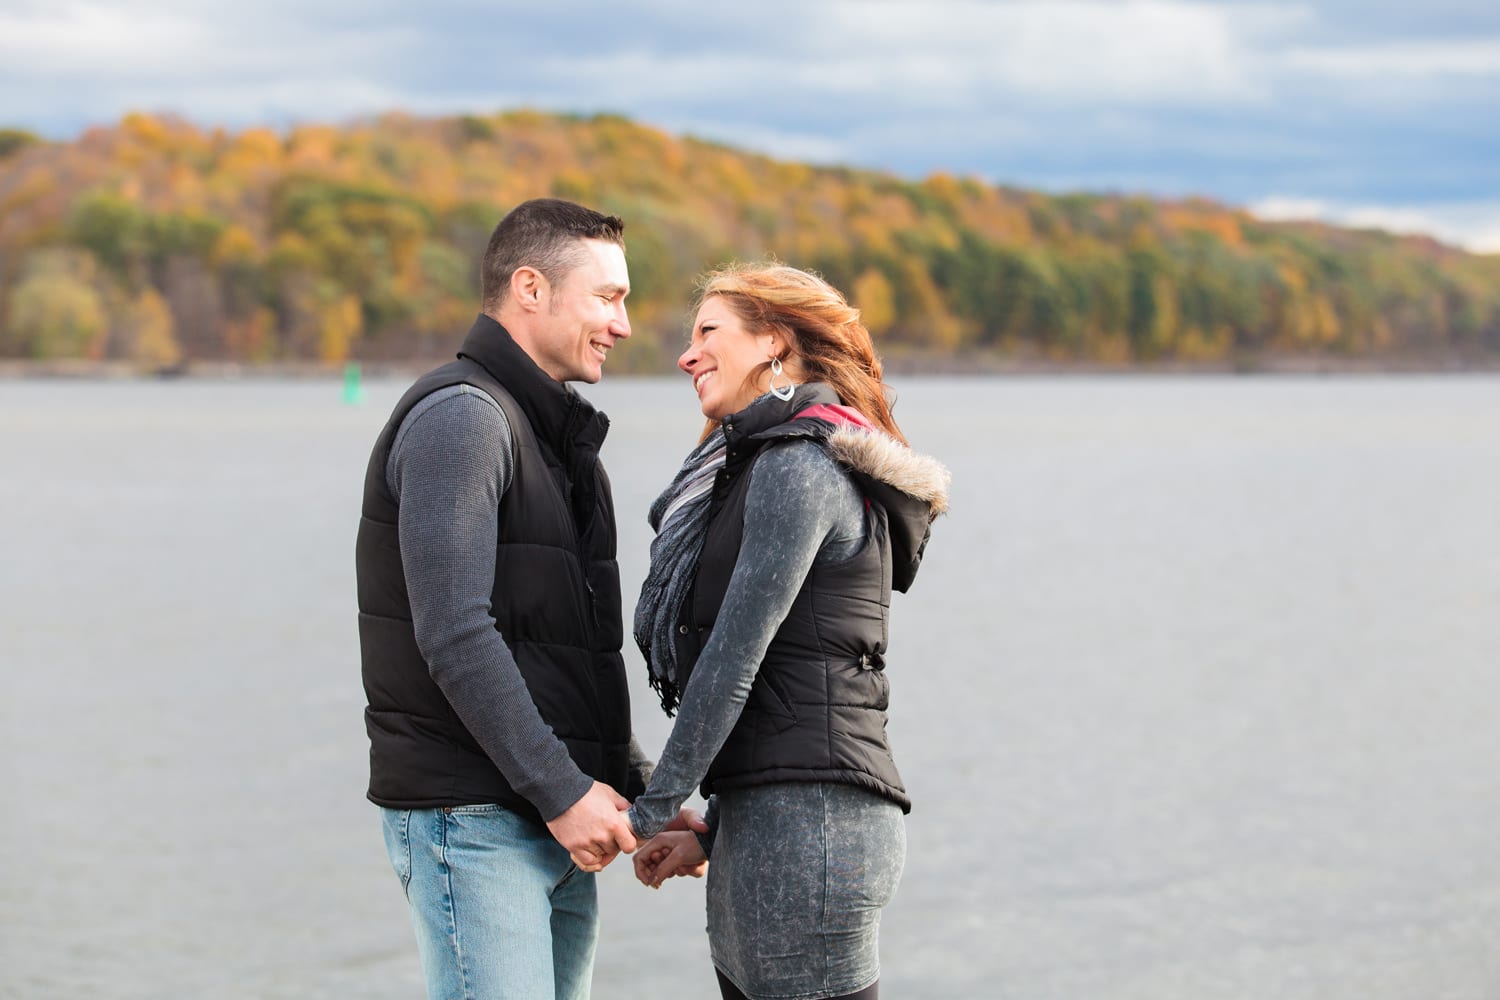 002-catskill_point_engagement_photography